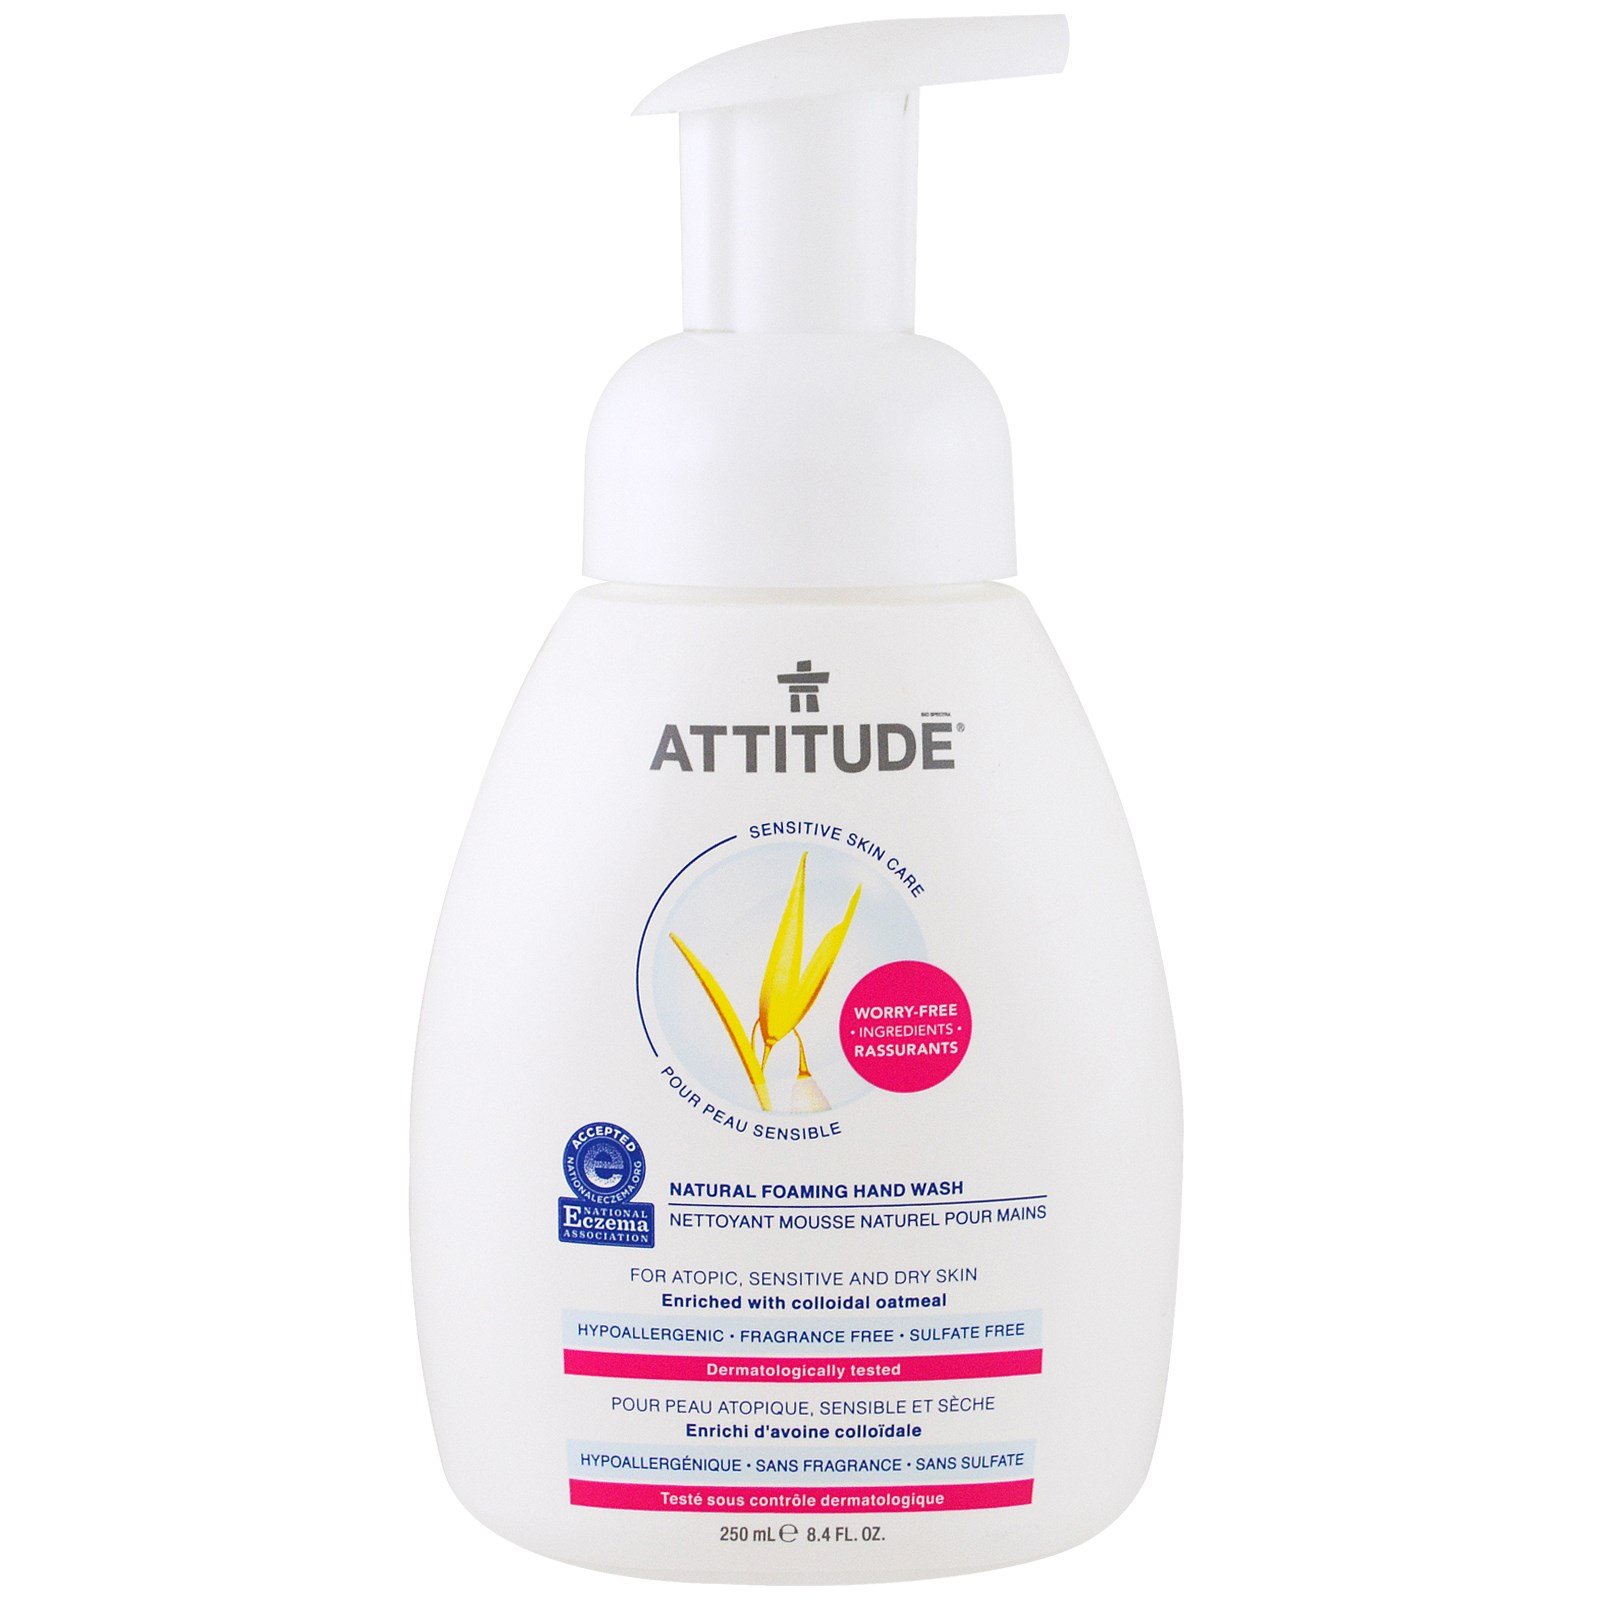 attitude skin care products review